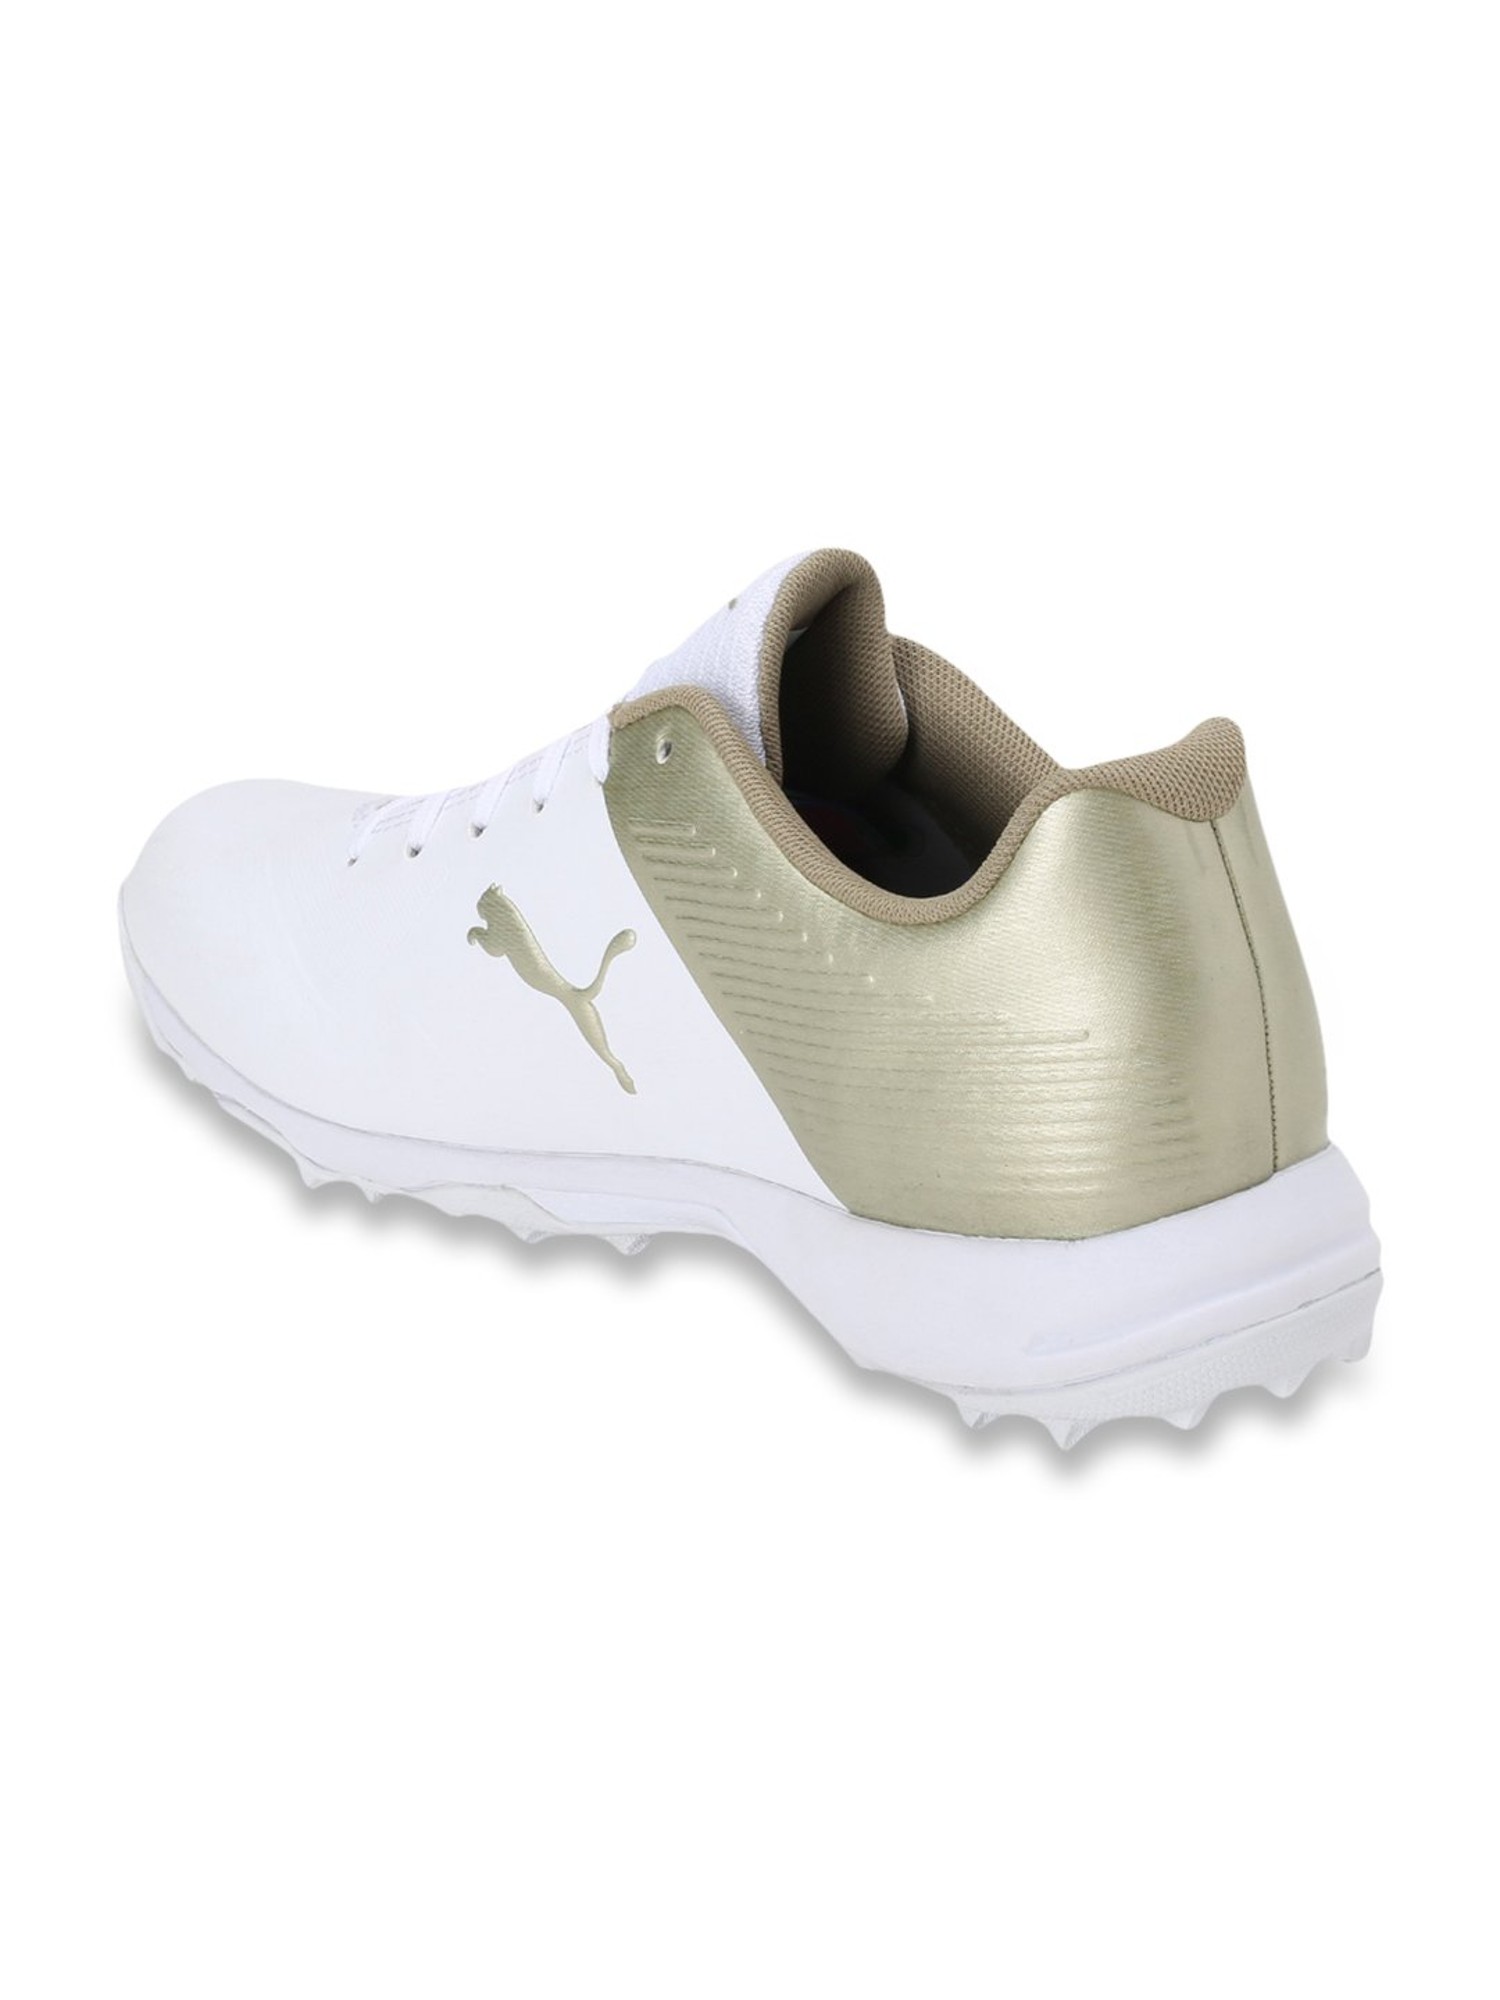 puma one8 cricket shoes gold